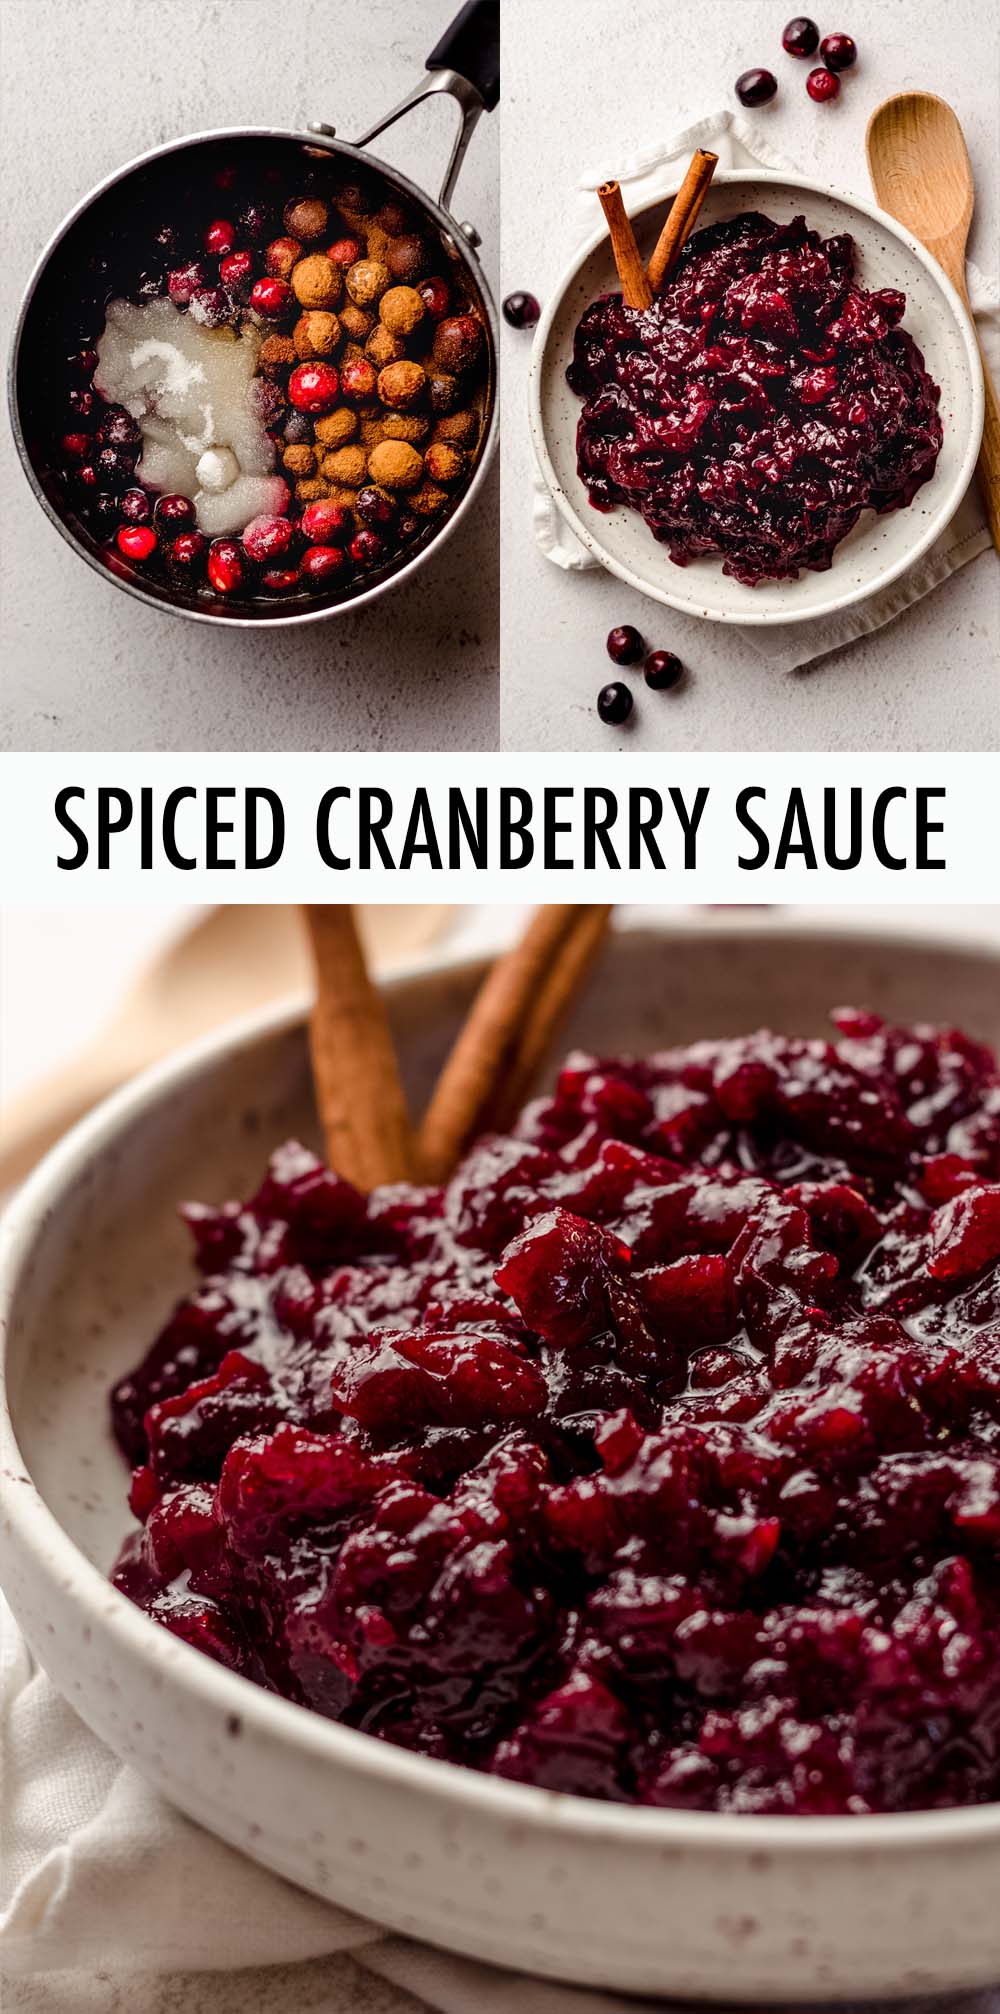 Traditional cranberry sauce gets a spicy makeover to keep Thanksgiving interesting! Infused with cinnamon and cloves, this spiced cranberry sauce will add a little flair to your holiday spread. via @frshaprilflours